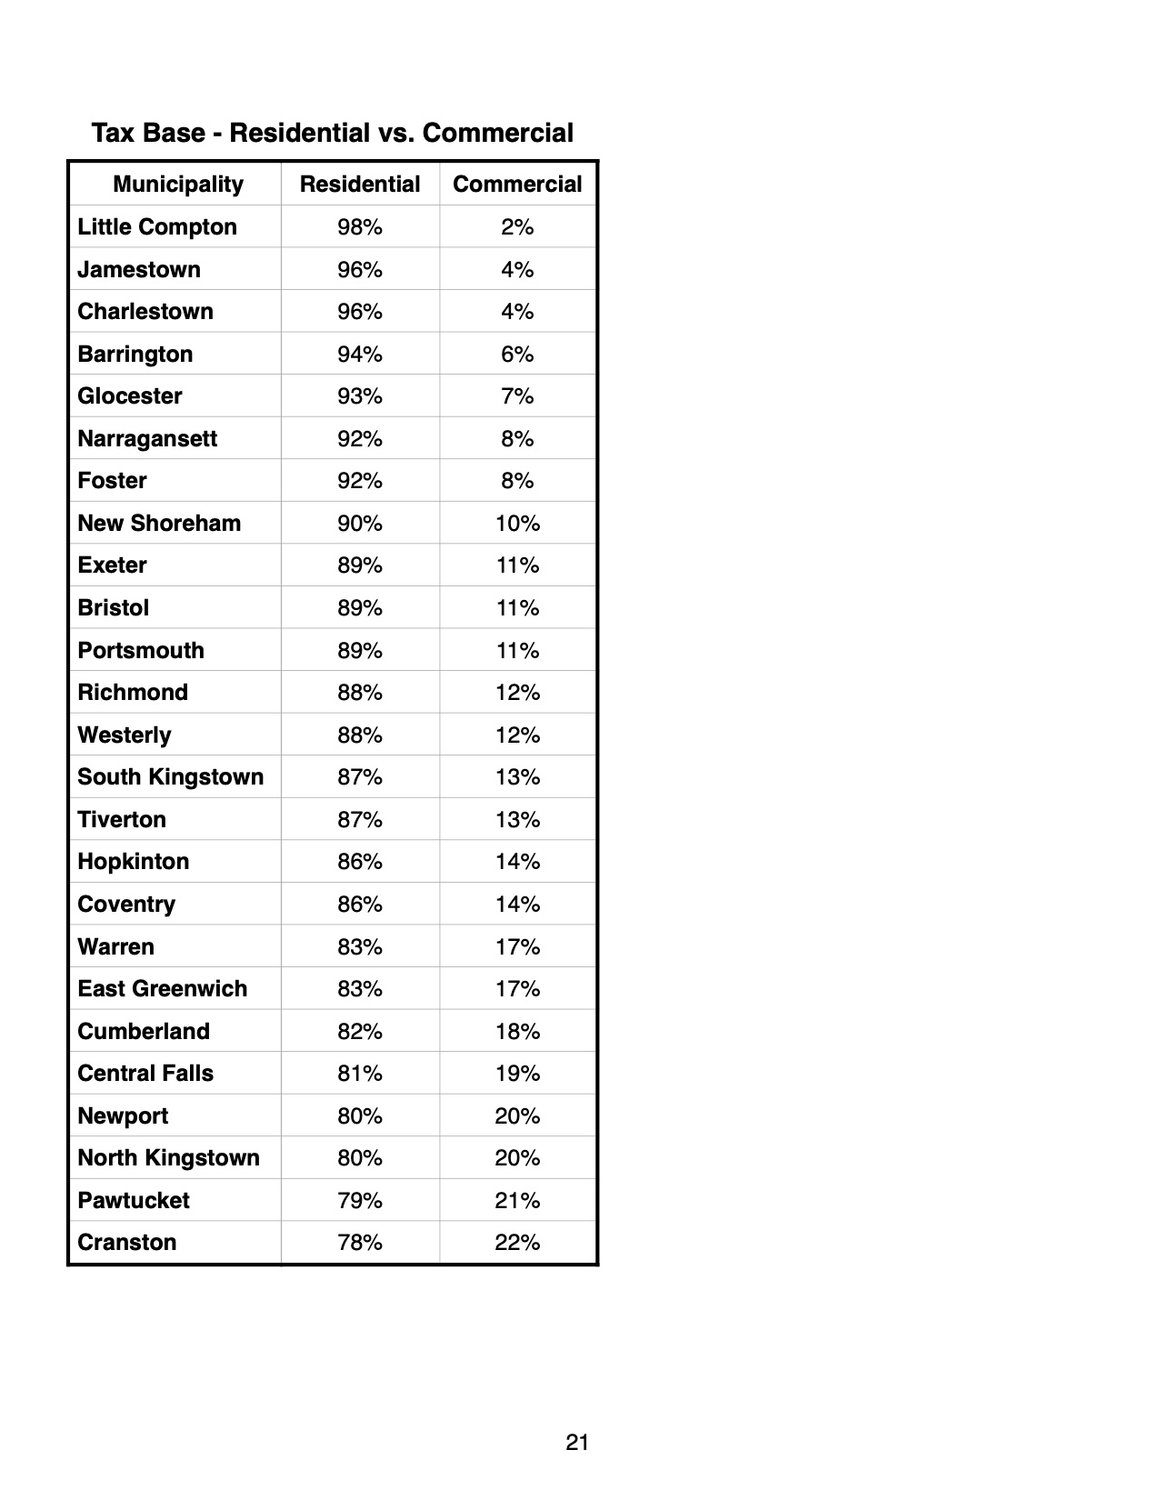 This chart shows the 25 Rhode Island municipalities with the highest percentage of Residential properties in their overall tax base. Barrington is fourth, behind three relatively rural or sparsely populated communities.